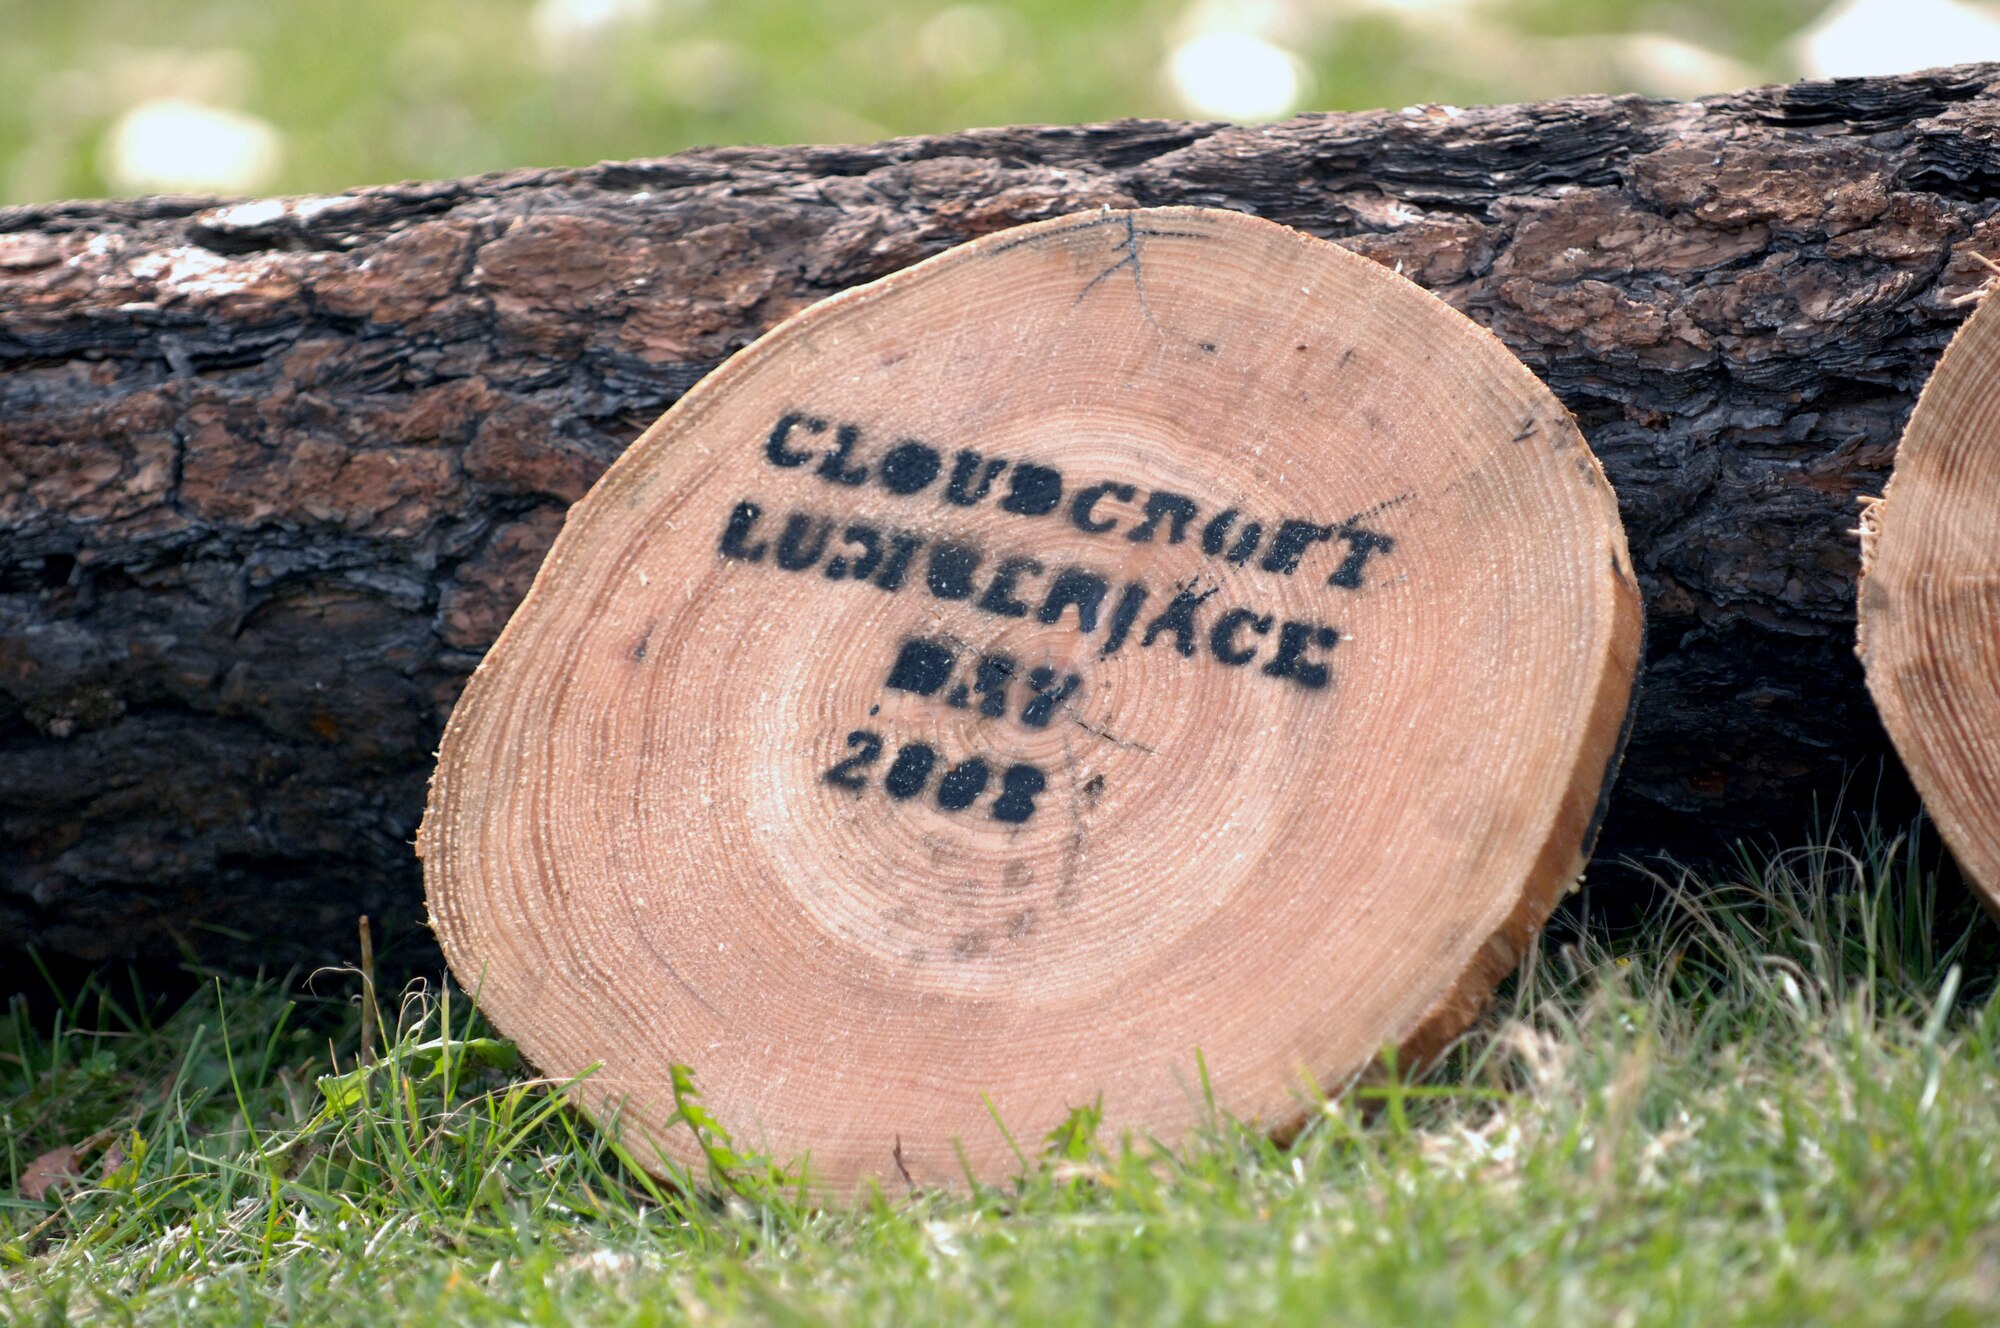 Circles of Pomerosa pine wood were chopped by competitors of Lumberjack Day held in Cloudcroft, N.M., September 20. After stamping black ink into the freshly cut wood, vistors were able to pick from a variety of different shapes and sizes to buy as a souvenir. (U.S. Air Force photo/Airman 1st. Class/Veronica Salgado)